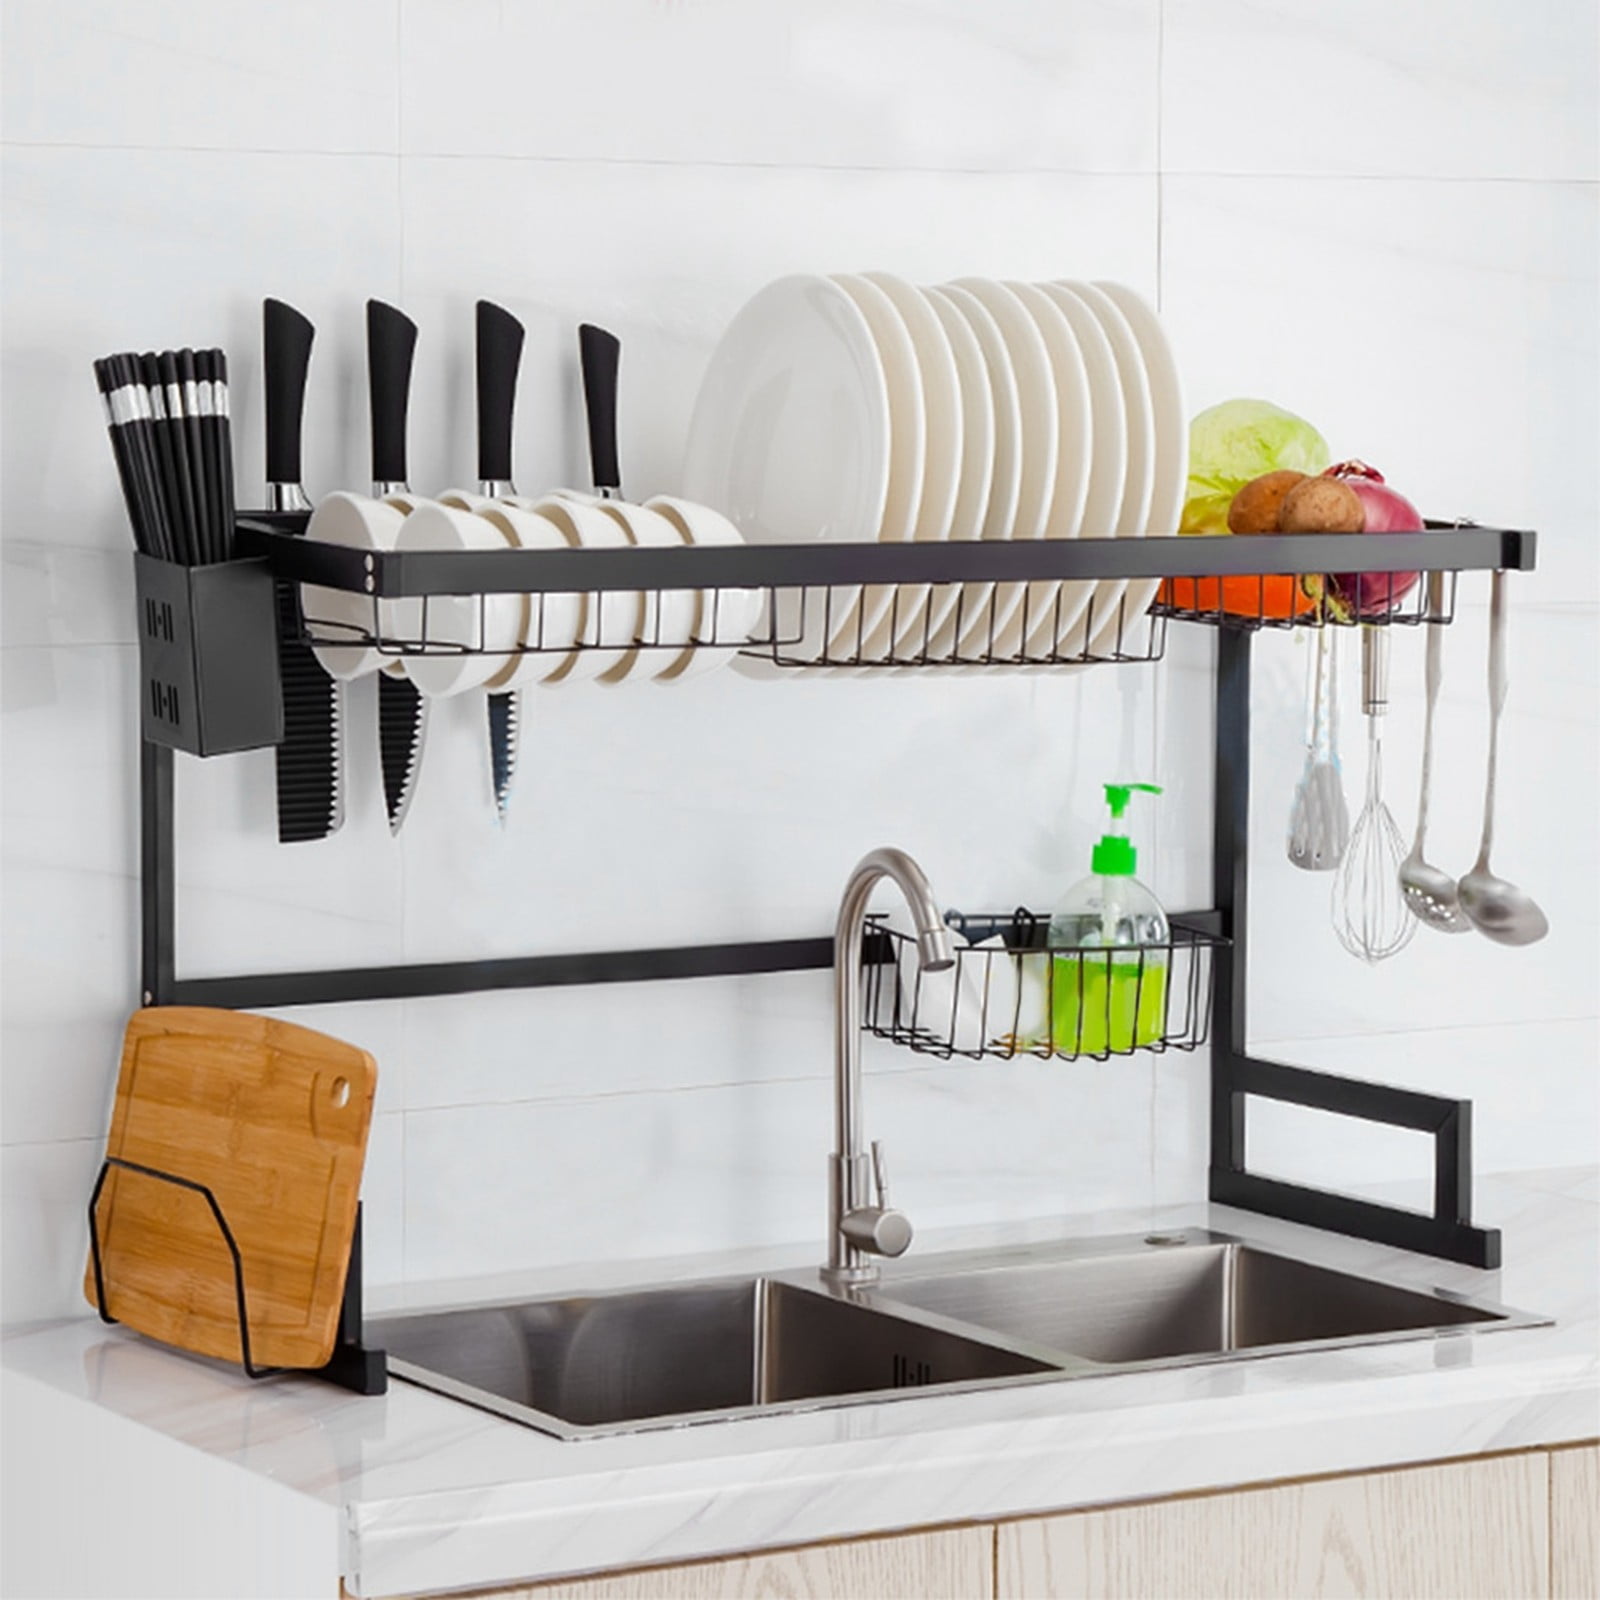 Details about   Over Sink Dish Drying Rack Stainless Steel Cutlery Drainer Kitchen Shelf Large 